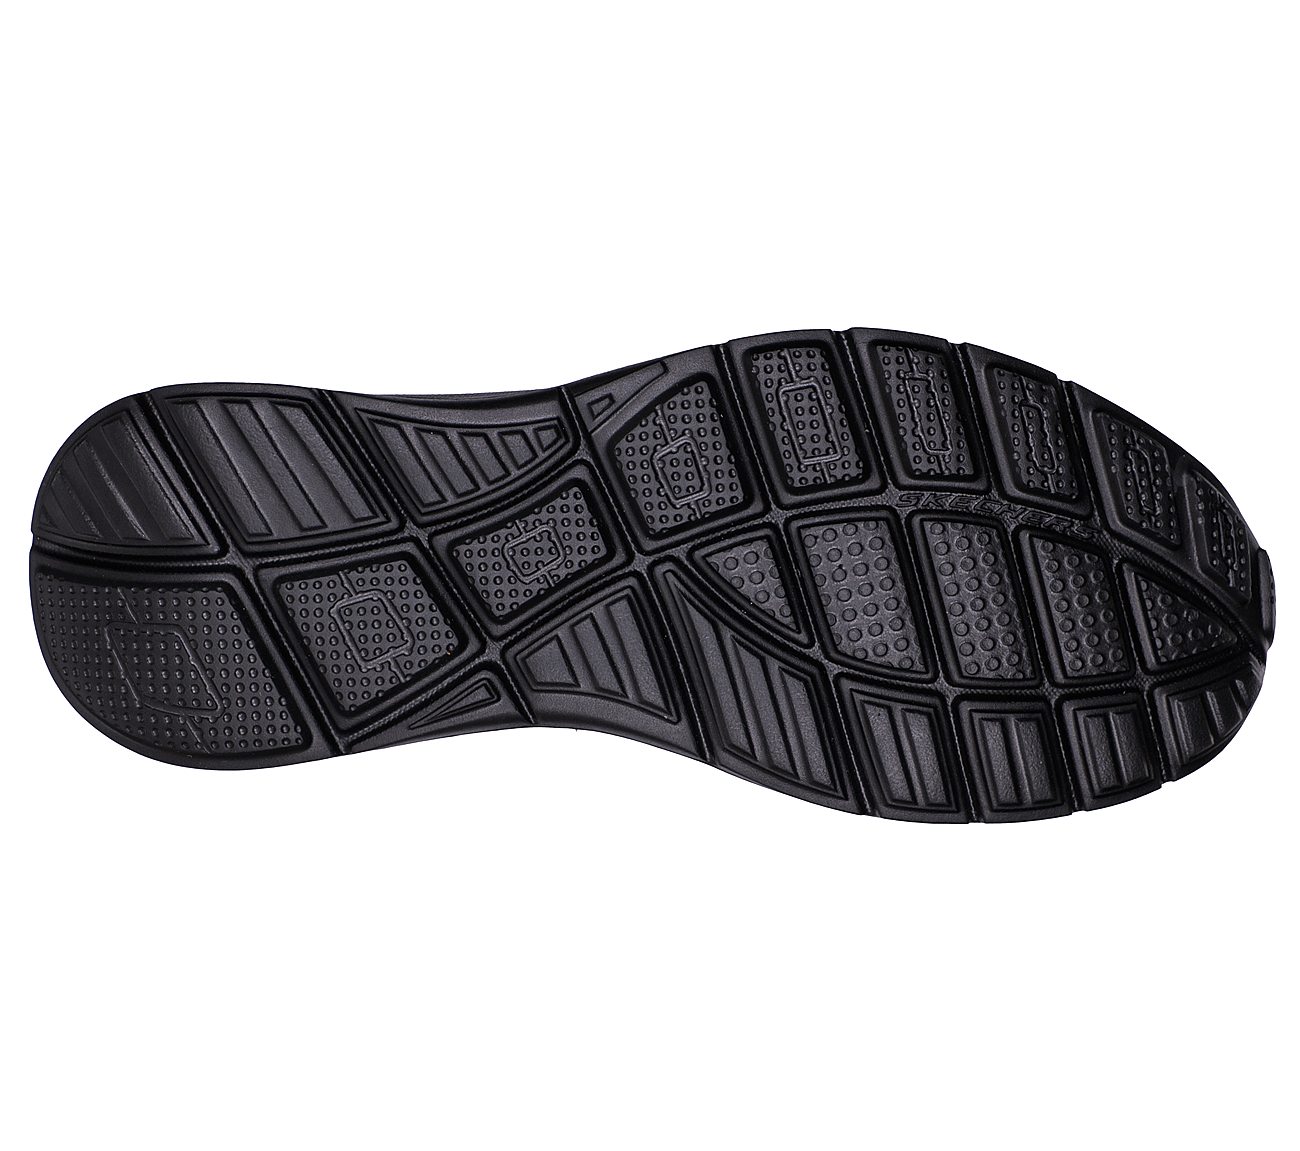 EQUALIZER 5.0 - PERSISTABLE, BBLACK Footwear Bottom View